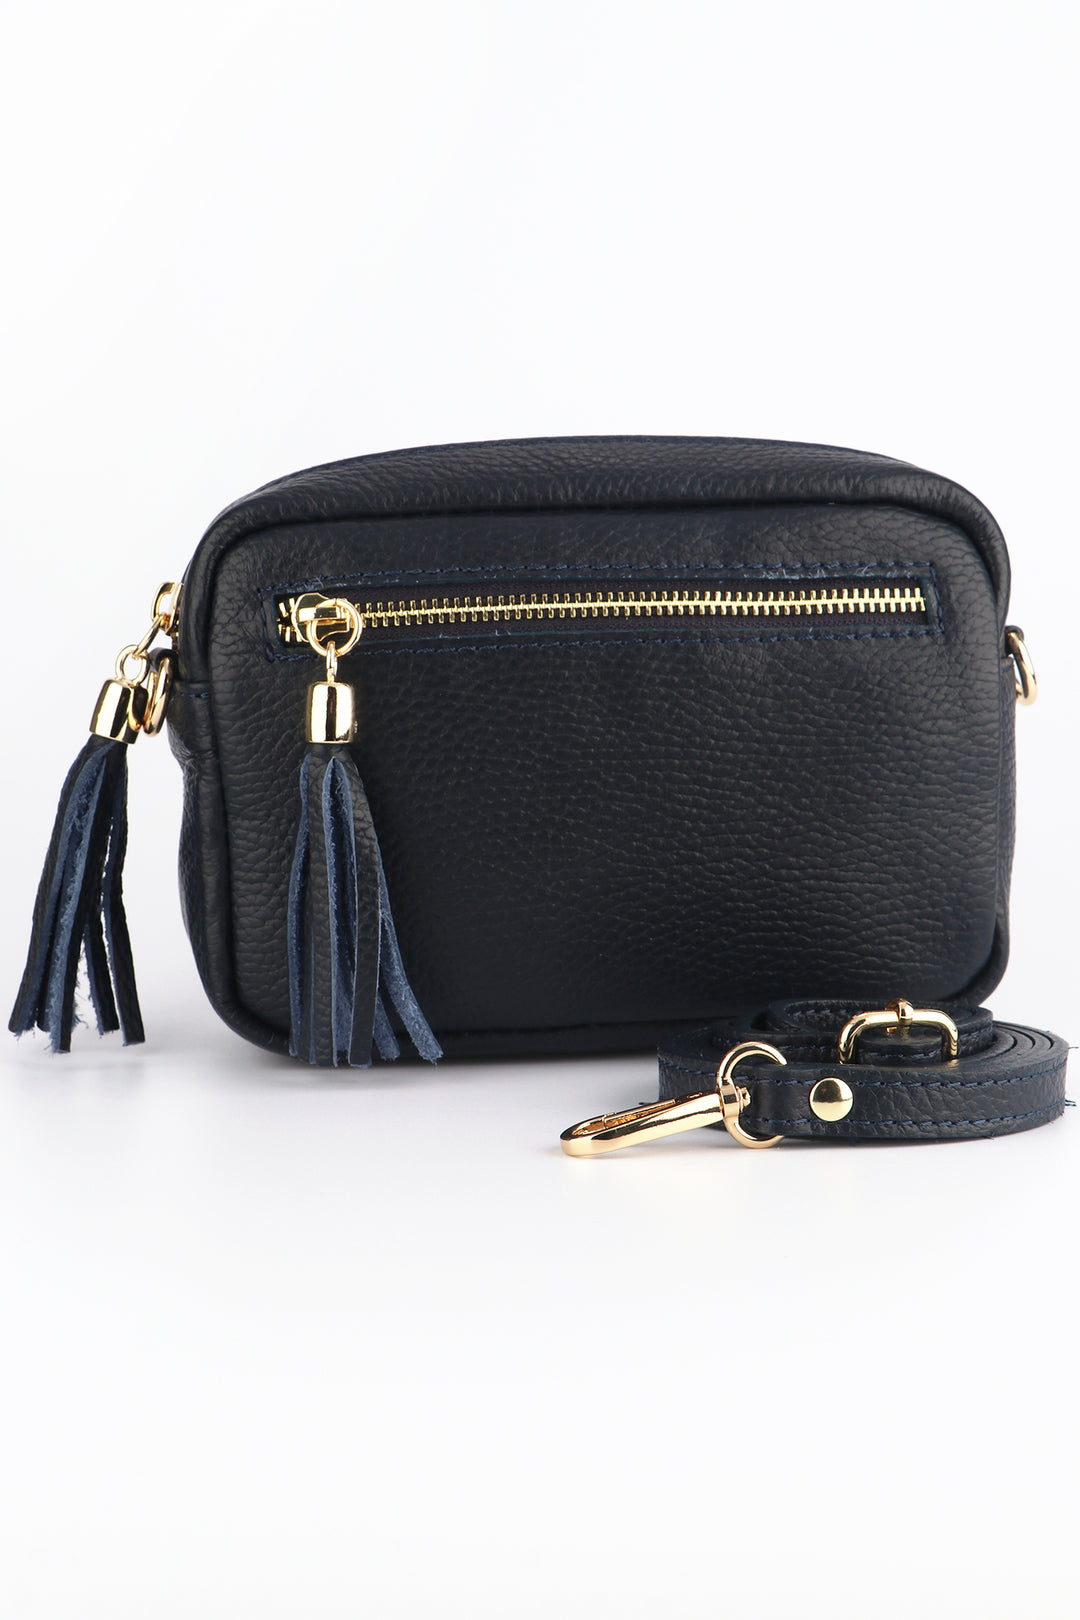 navy blue small leather crossbody bag with two zip compartments and a detachable bag strap